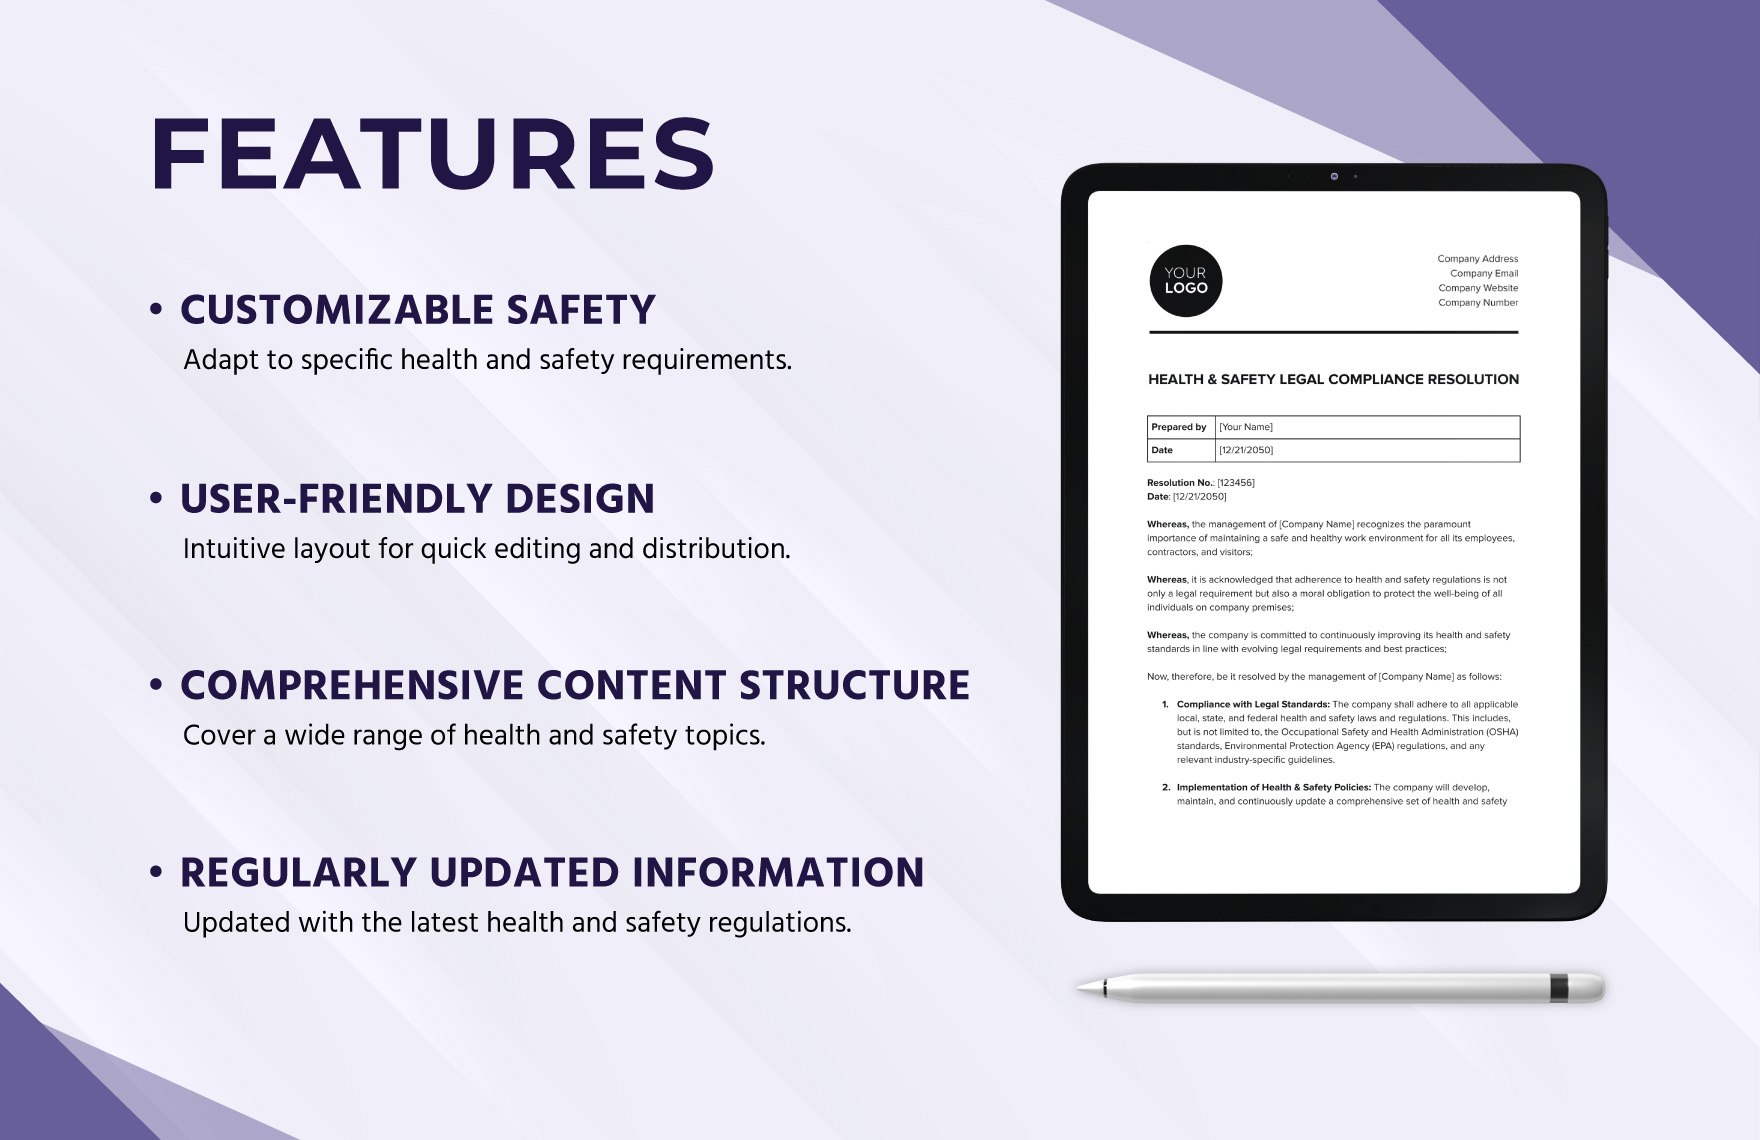 Health & Safety Legal Compliance Resolution Template